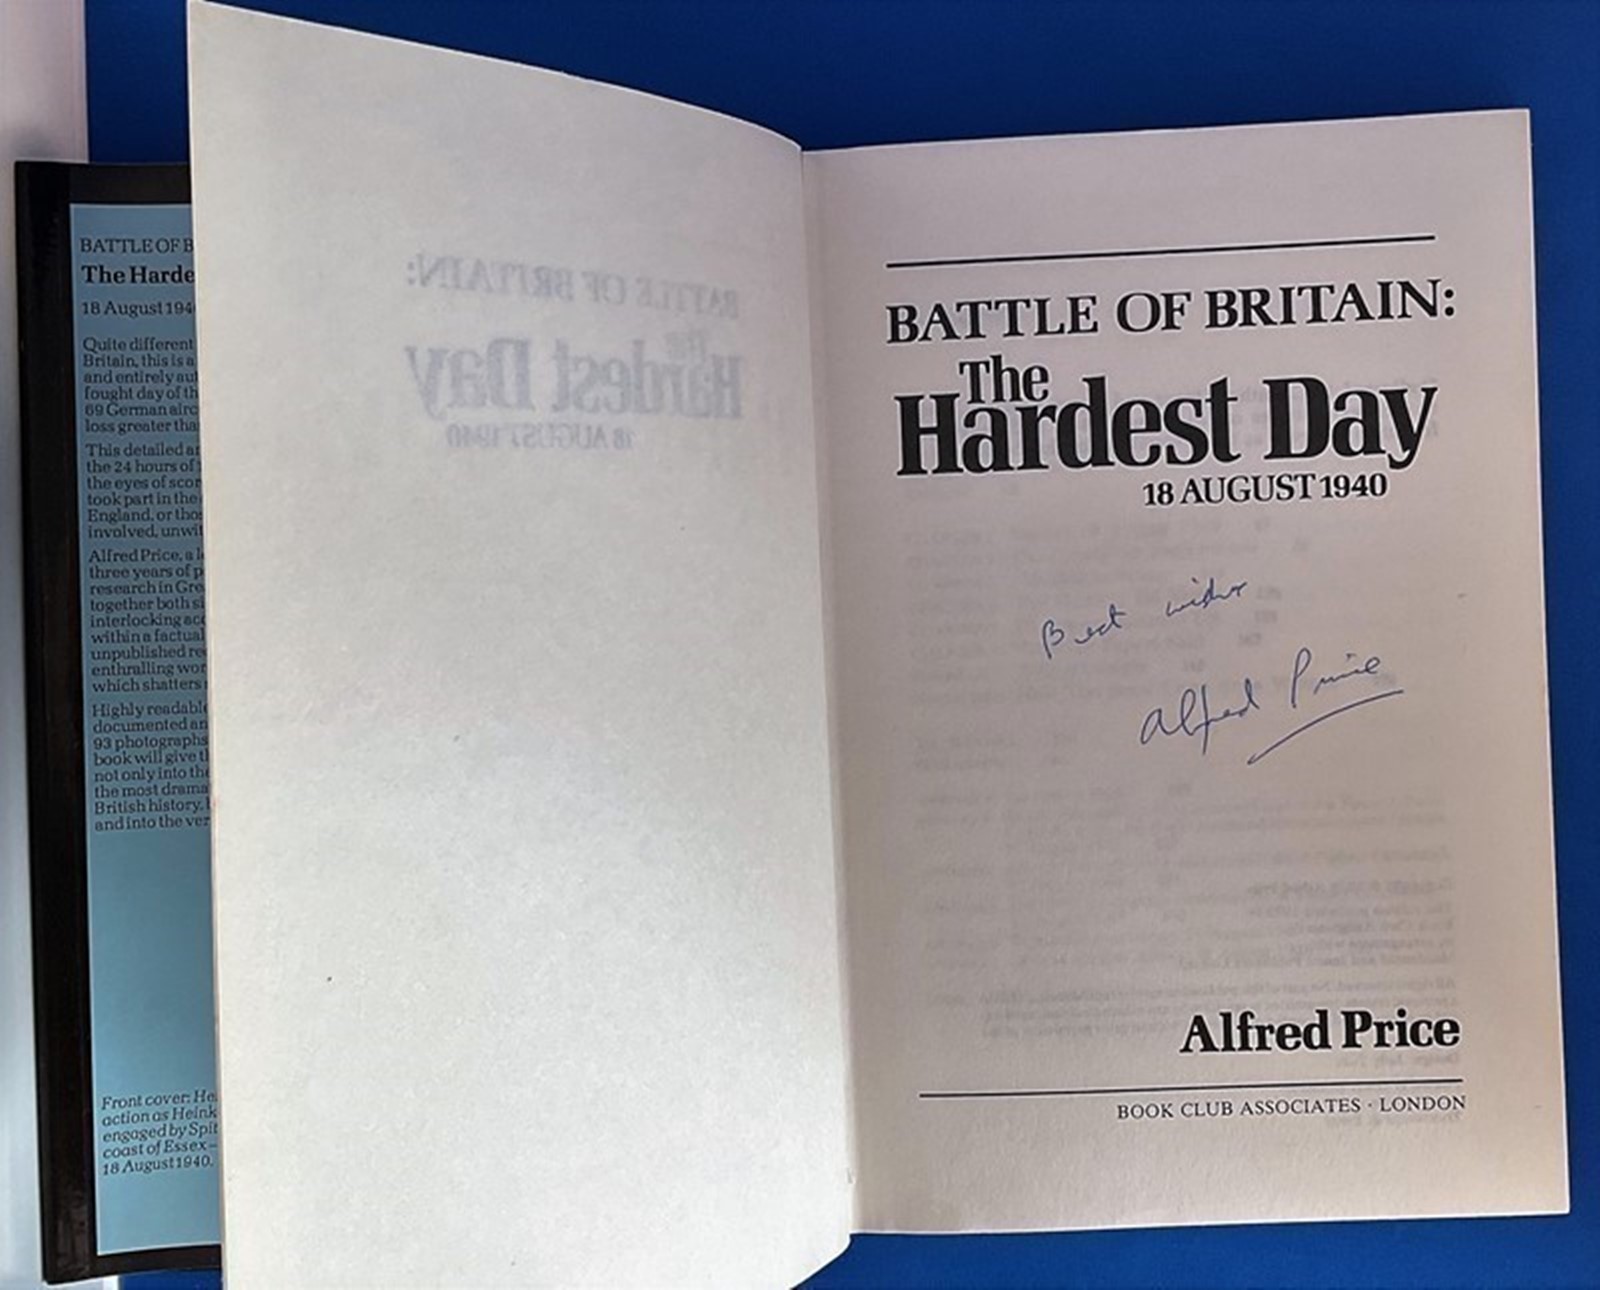 Alfred Price signed The Hardest Day hardback book about Battle of Britain